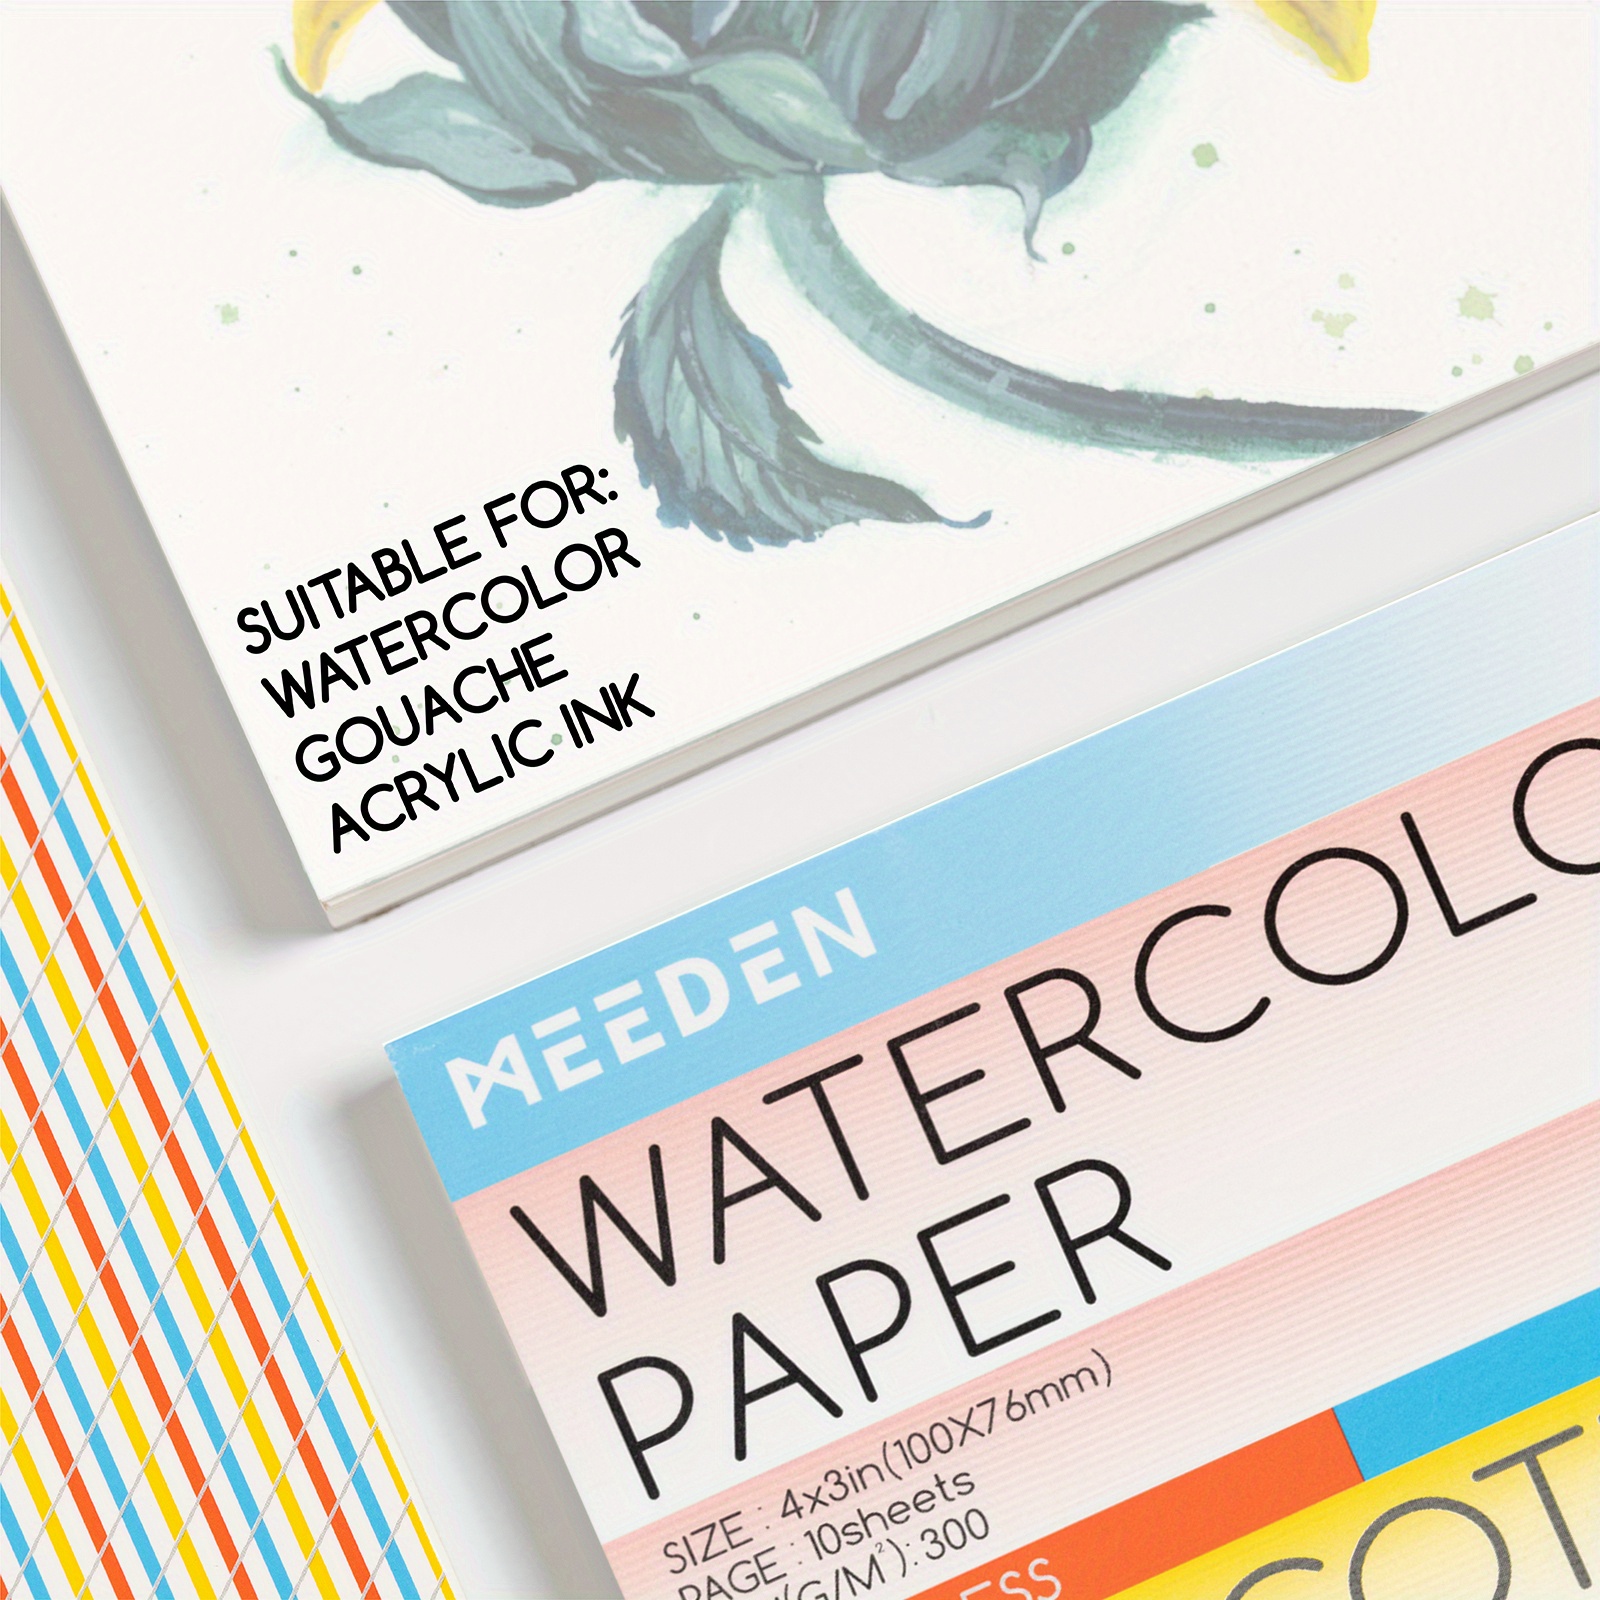 Spiral Bound Watercolor Paper Pad, Watercolor Sketchbooks for Watercolors,  Gouache, Acrylics, Pencils, Wet & Dry Media